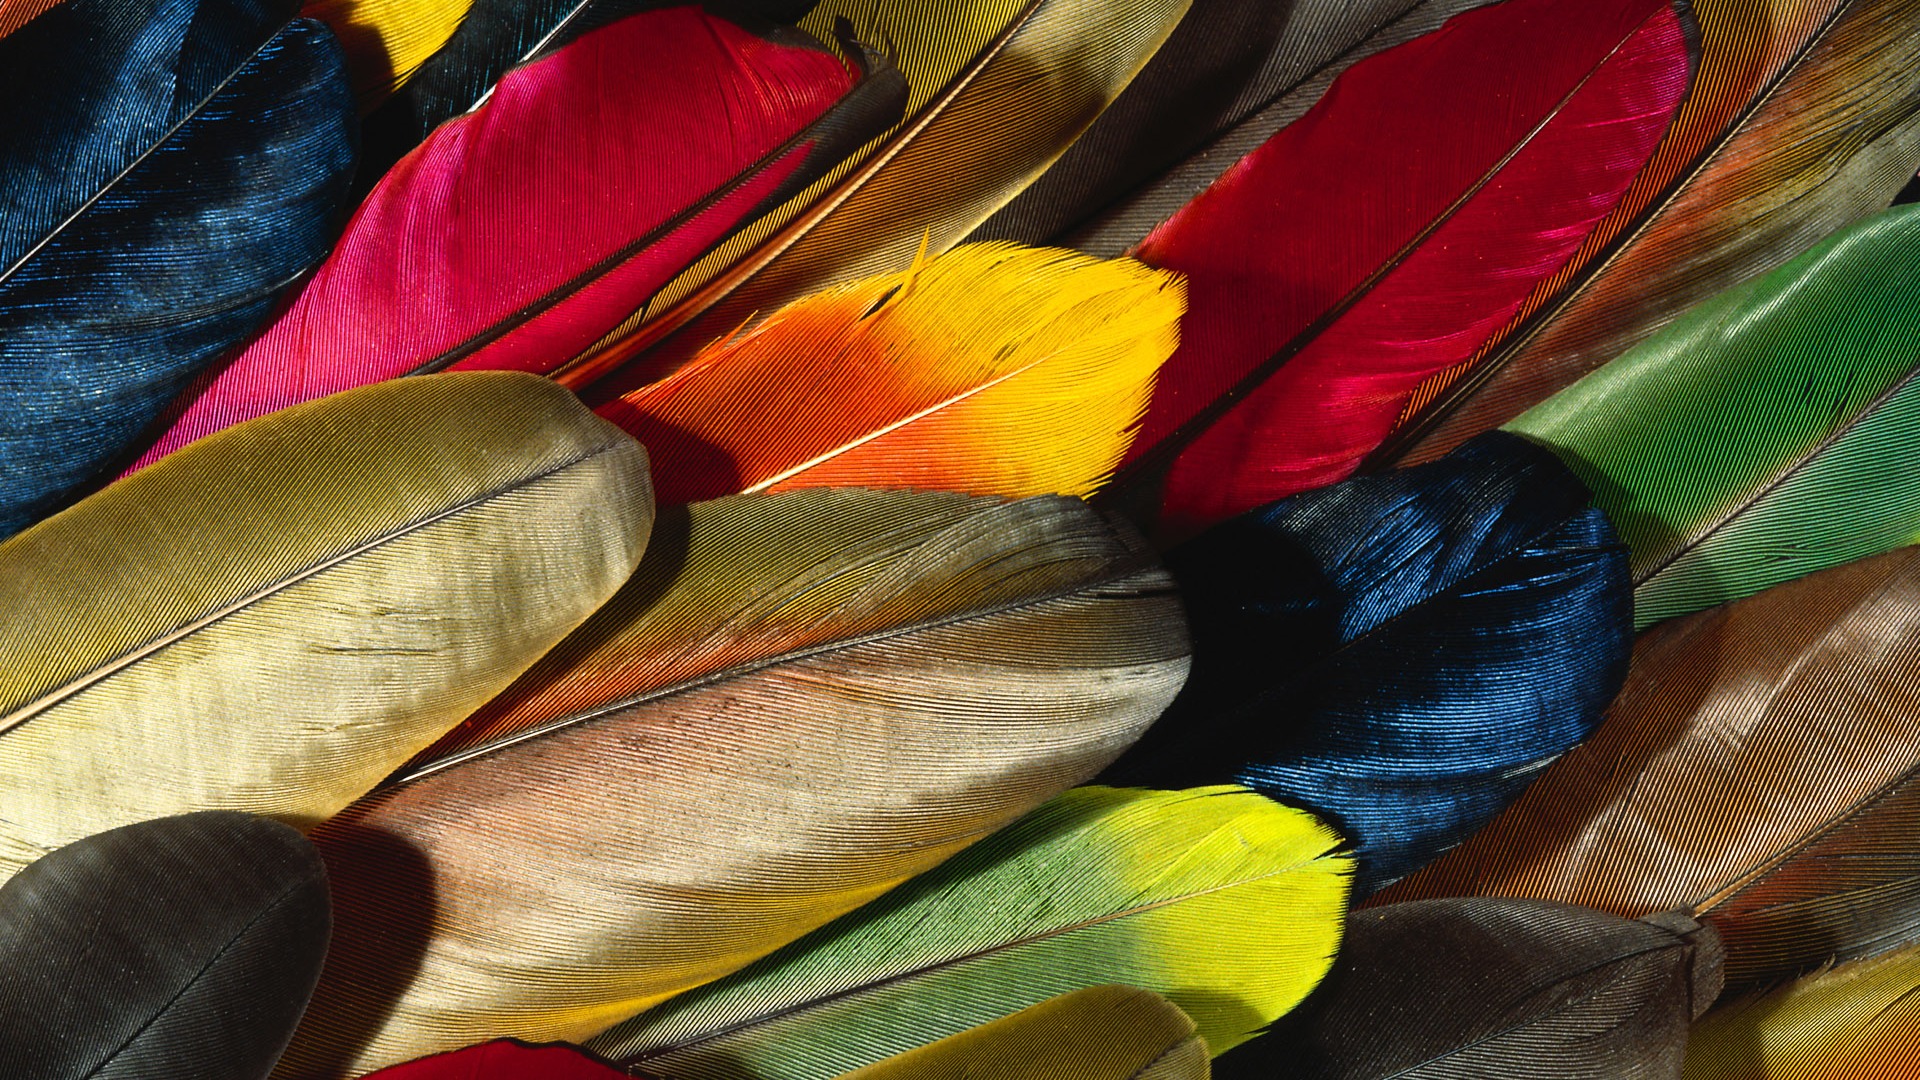 Colorful feather wings close-up wallpaper (2) #1 - 1920x1080